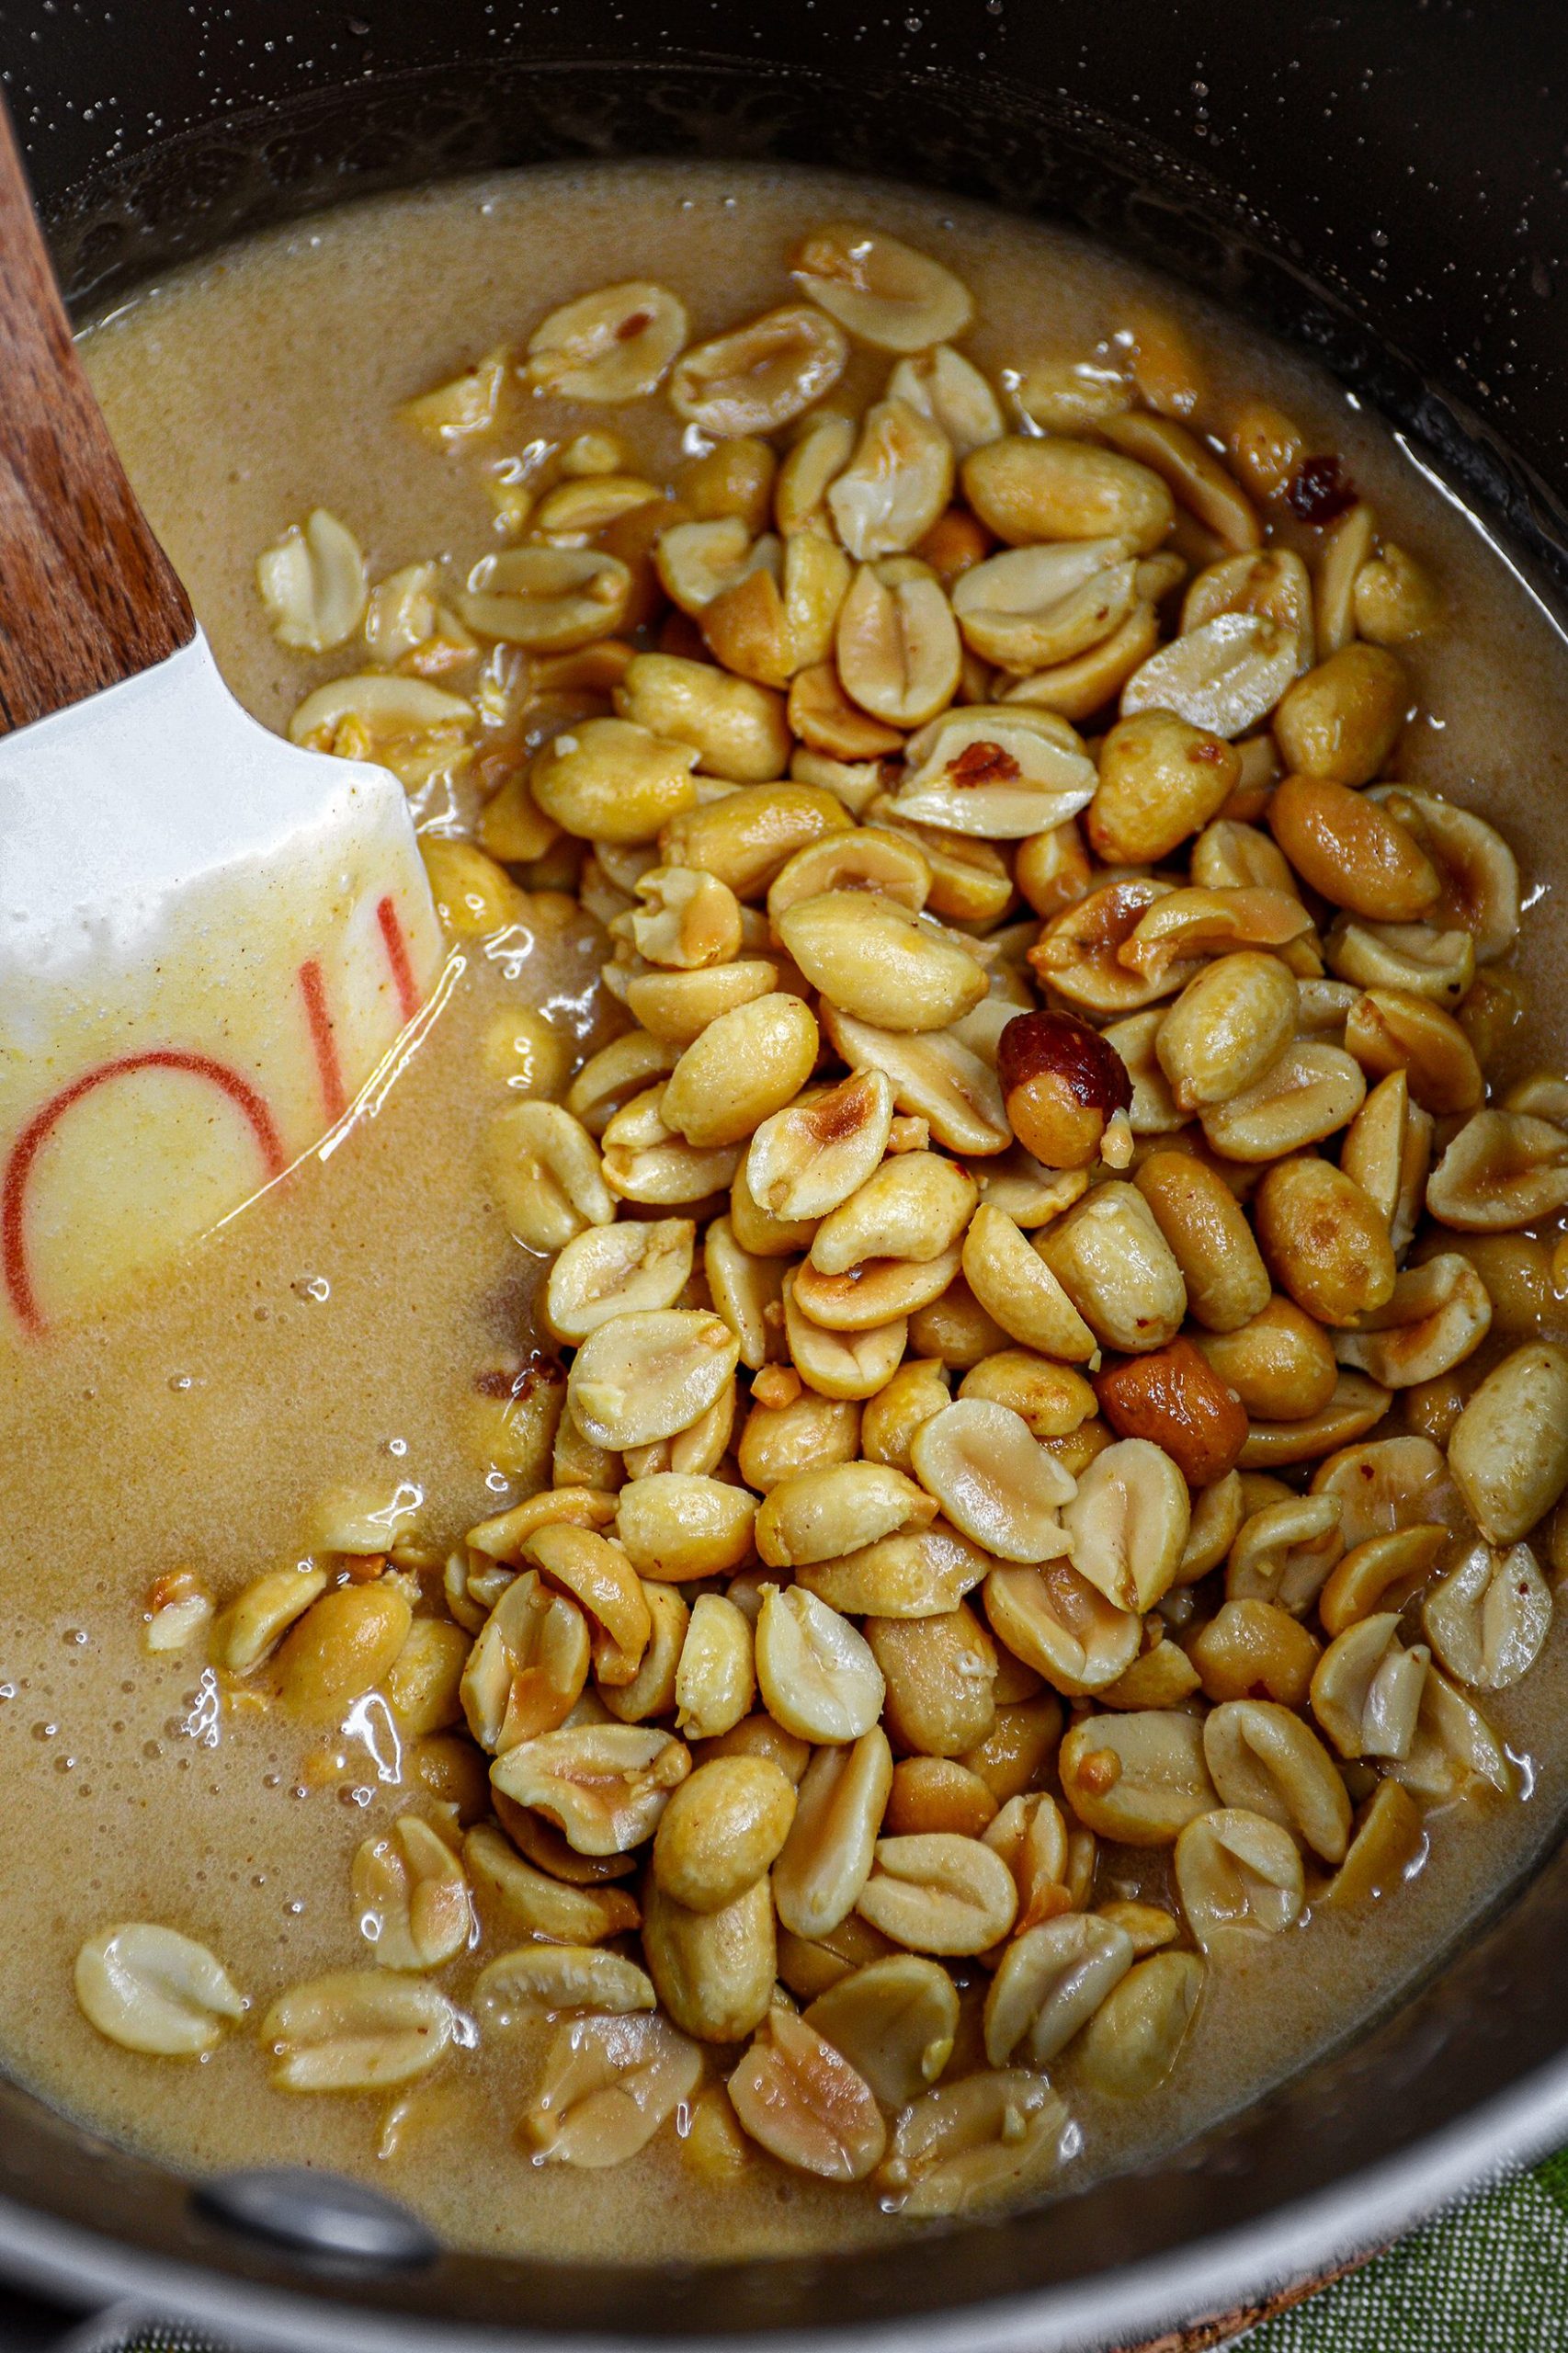 Heat the pot to medium, stir. Continue to stir until the sugar dissolves and the mixture comes to a boil.